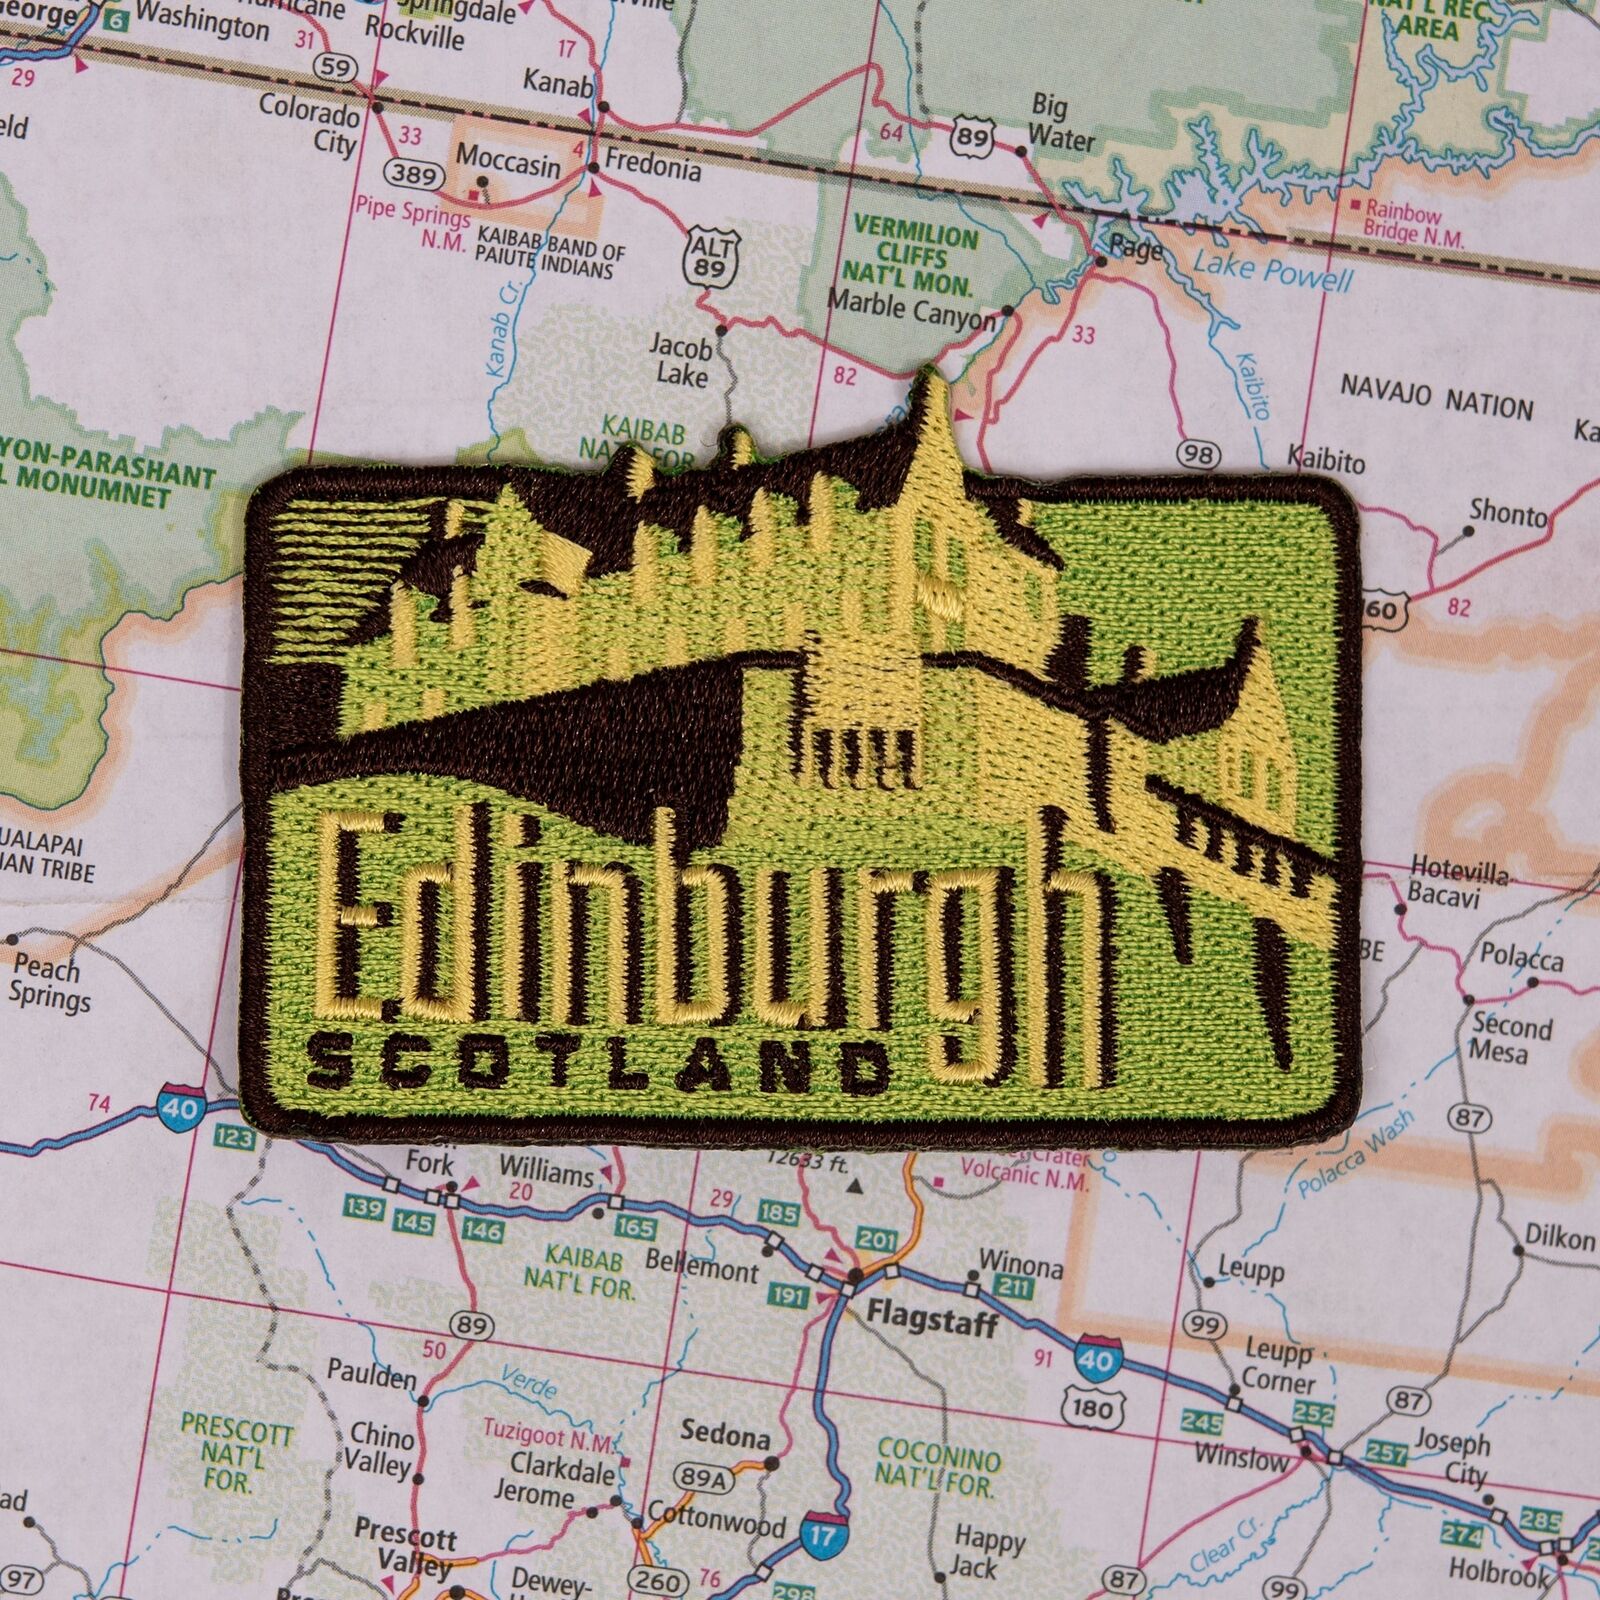 Edinburgh Iron on Travel Patch - Great Souvenir or Gift for travellers